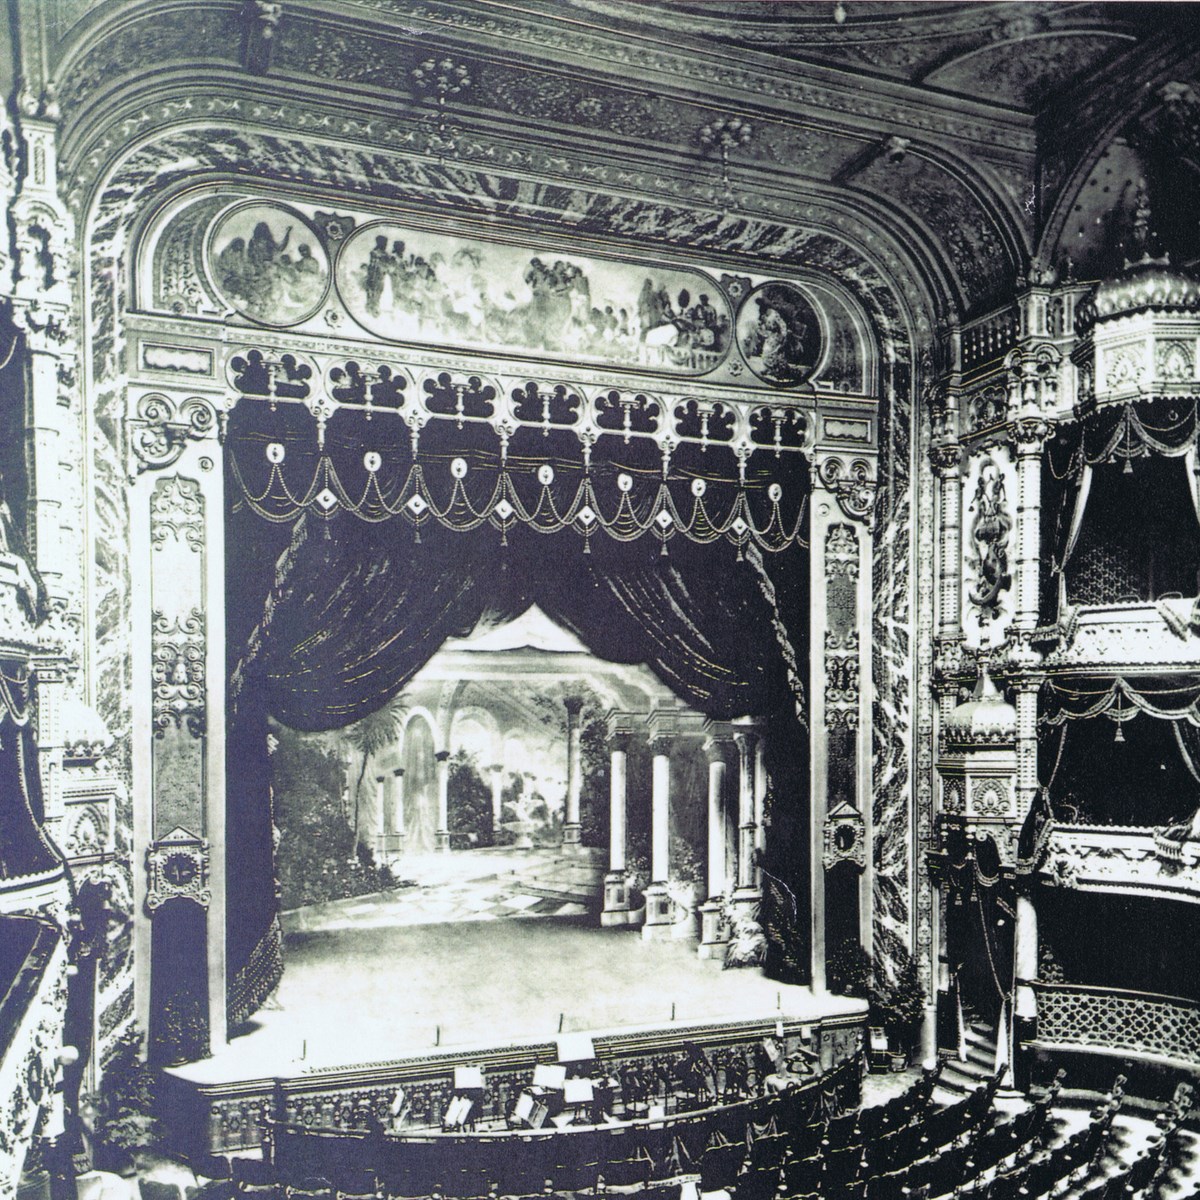 An old picture of the Festival Theatre in black and white